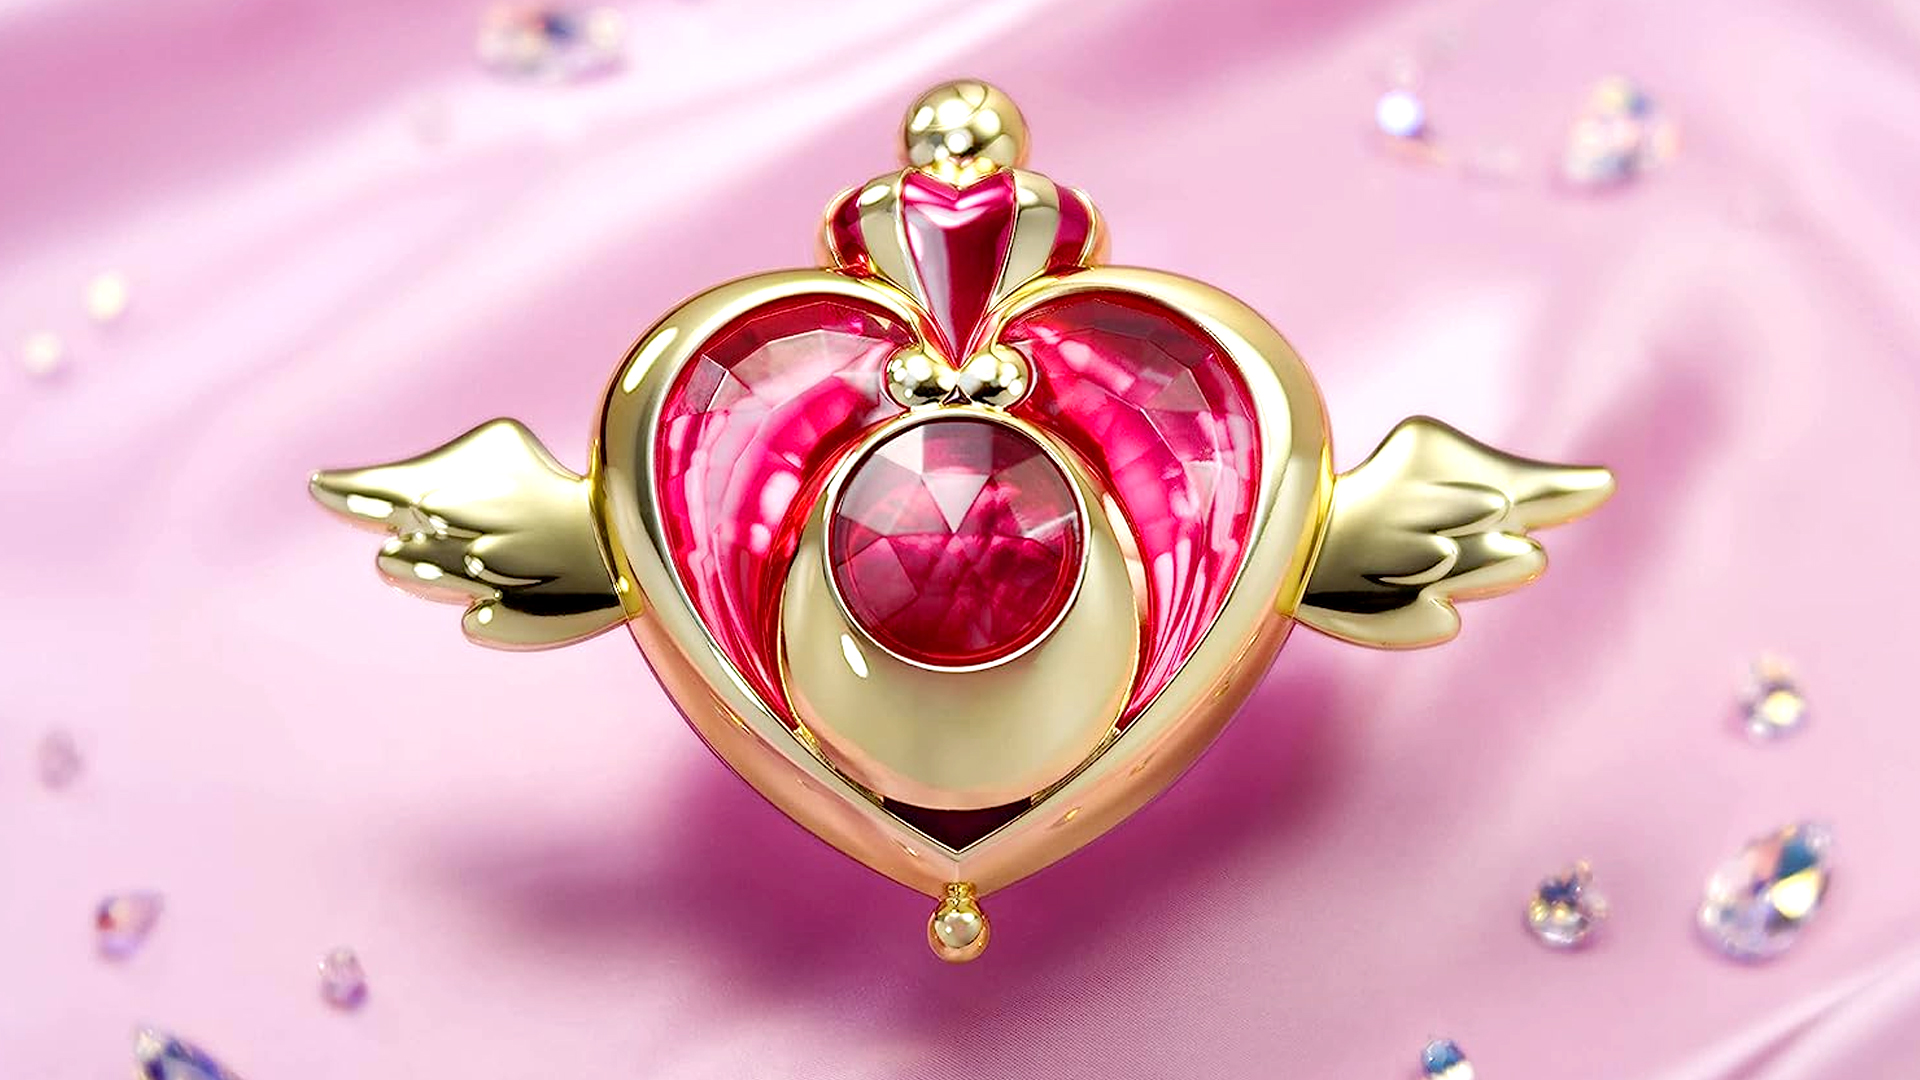 Sailor Moon Eternal Crisis Moon Compact Proplica on a pink fabric with crystals and gems.